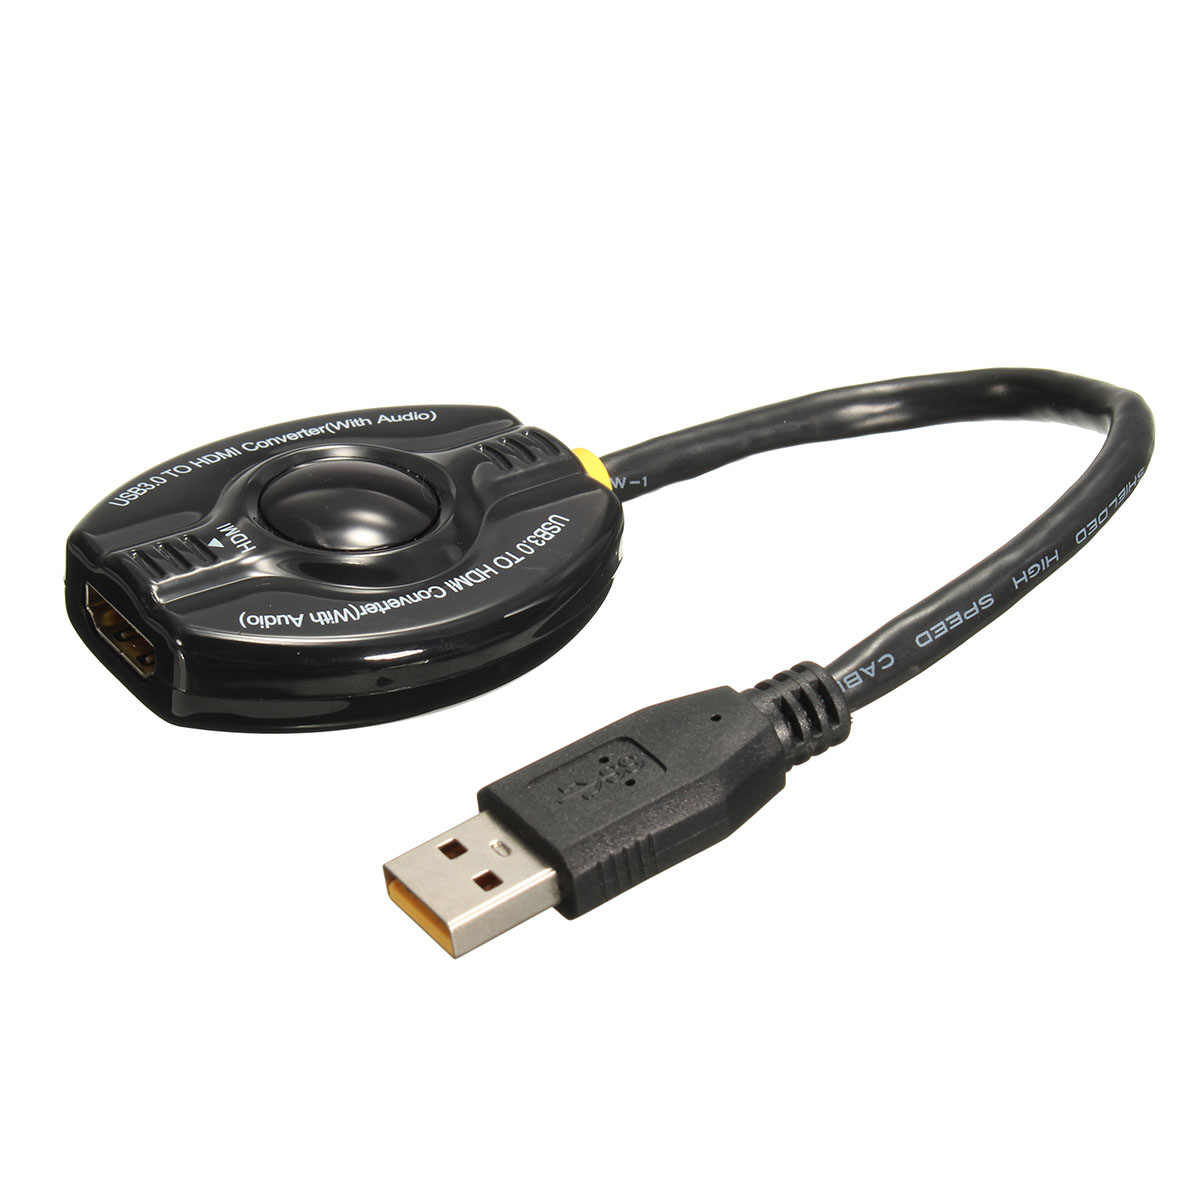 USB-30-to-HDMI-Adapter-Cable-5-Gbps-support-1080P-Projector-POS-System-CRT-LCD-LED-Monitor-1973033-4